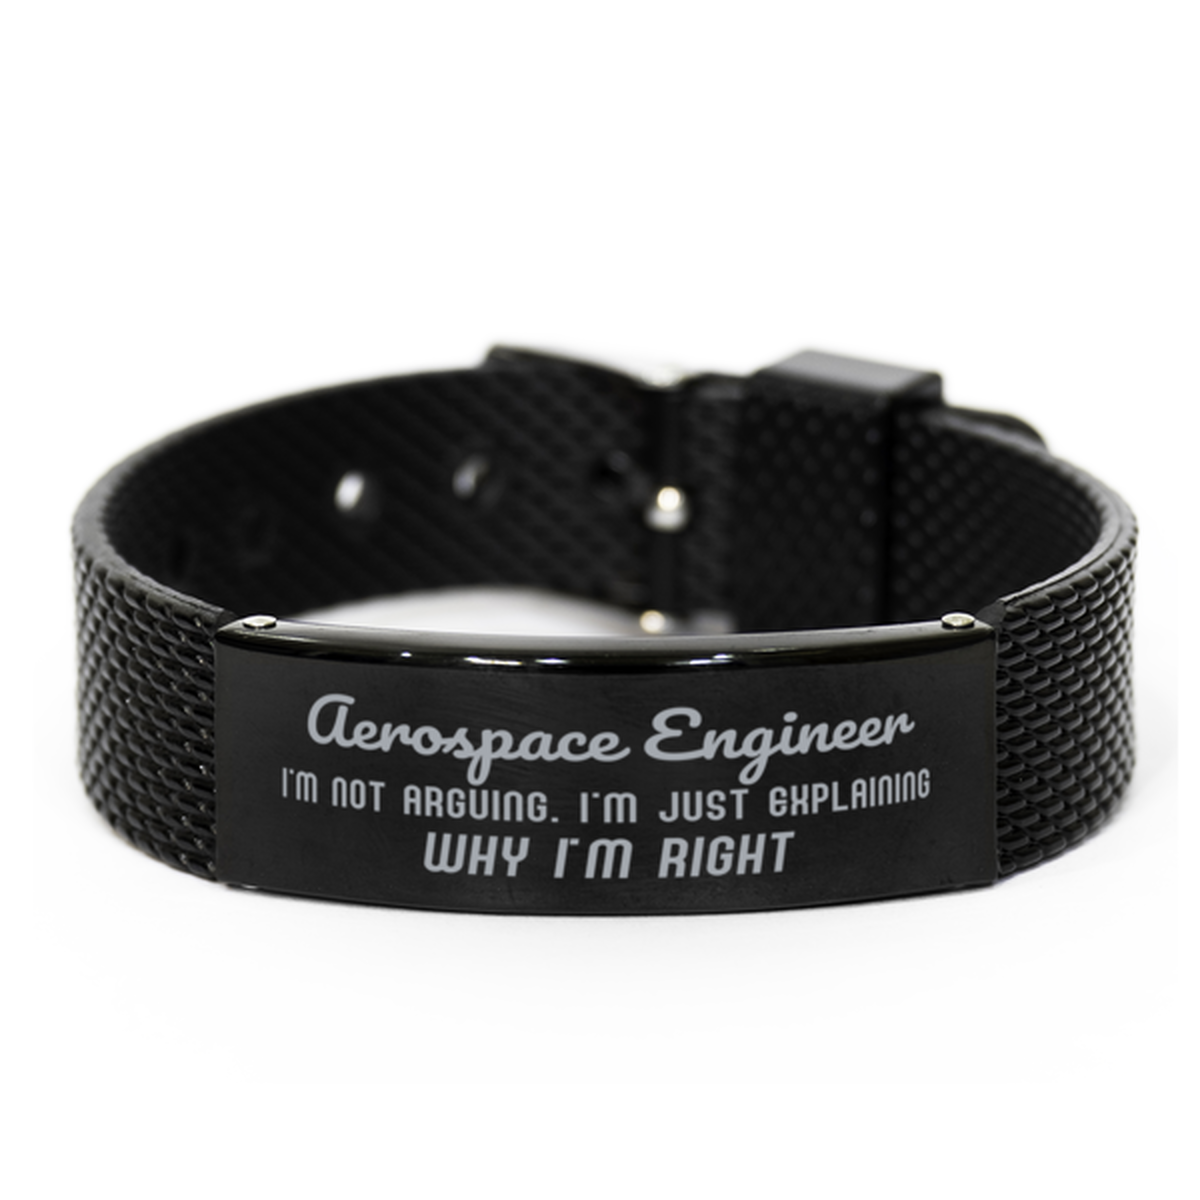 Aerospace Engineer I'm not Arguing. I'm Just Explaining Why I'm RIGHT Black Shark Mesh Bracelet, Funny Saying Quote Aerospace Engineer Gifts For Aerospace Engineer Graduation Birthday Christmas Gifts for Men Women Coworker